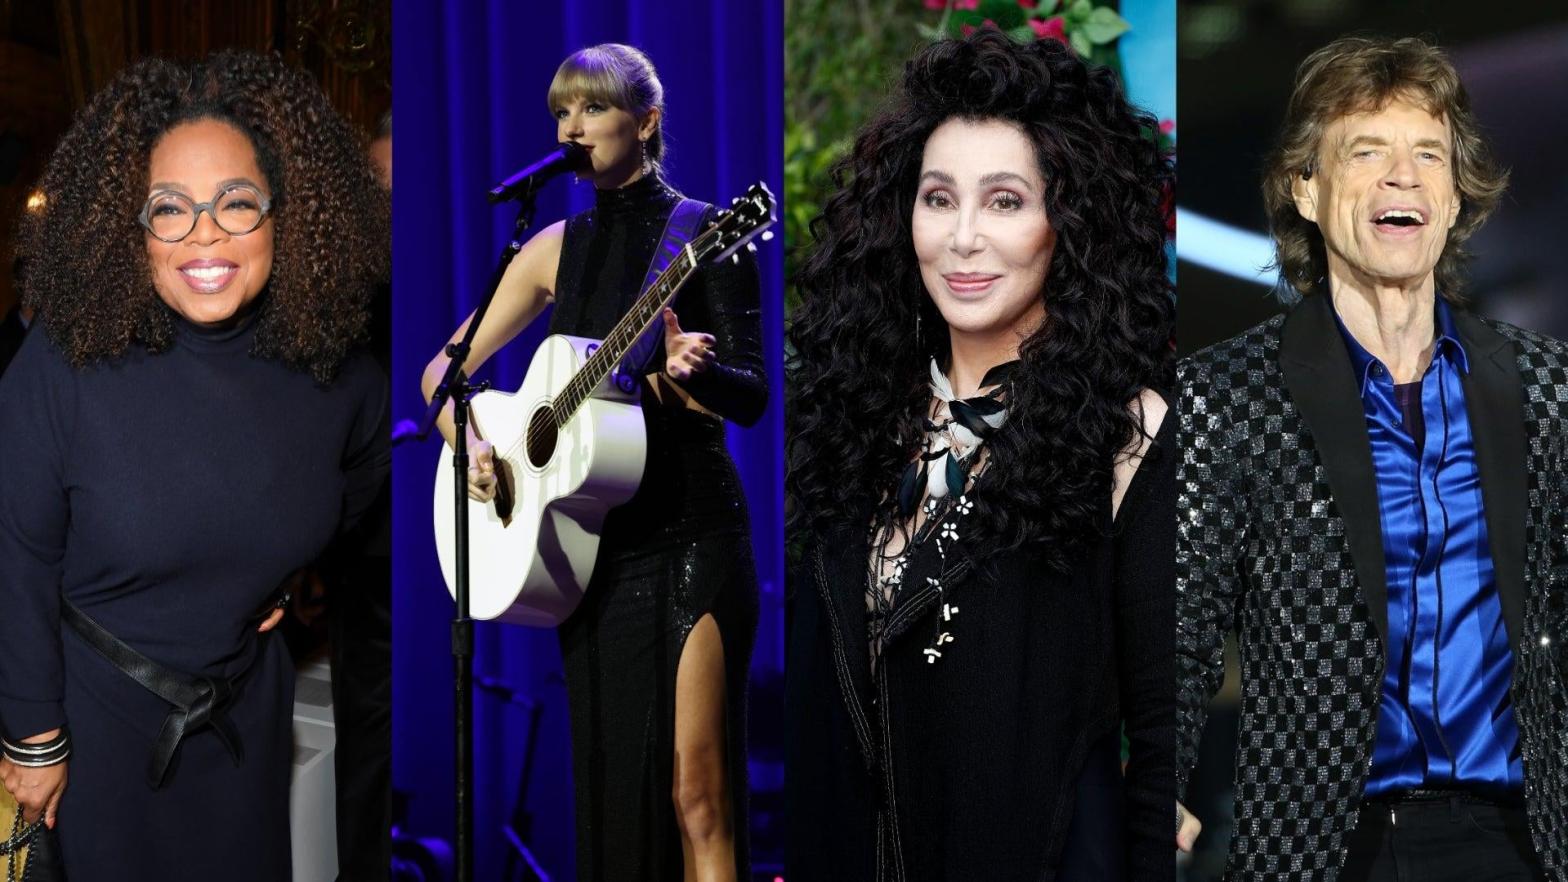 Oprah, Taylor Swift, Cher, and Mick Jagger have all died this week according to TikTok. They're very much alive, I promise. (Image: Pascal Le Segretain, Getty Images,Image: Terry Wyatt, Getty Images,Image: John Phillips, Getty Images,Image: Fiona Goodall, Getty Images)